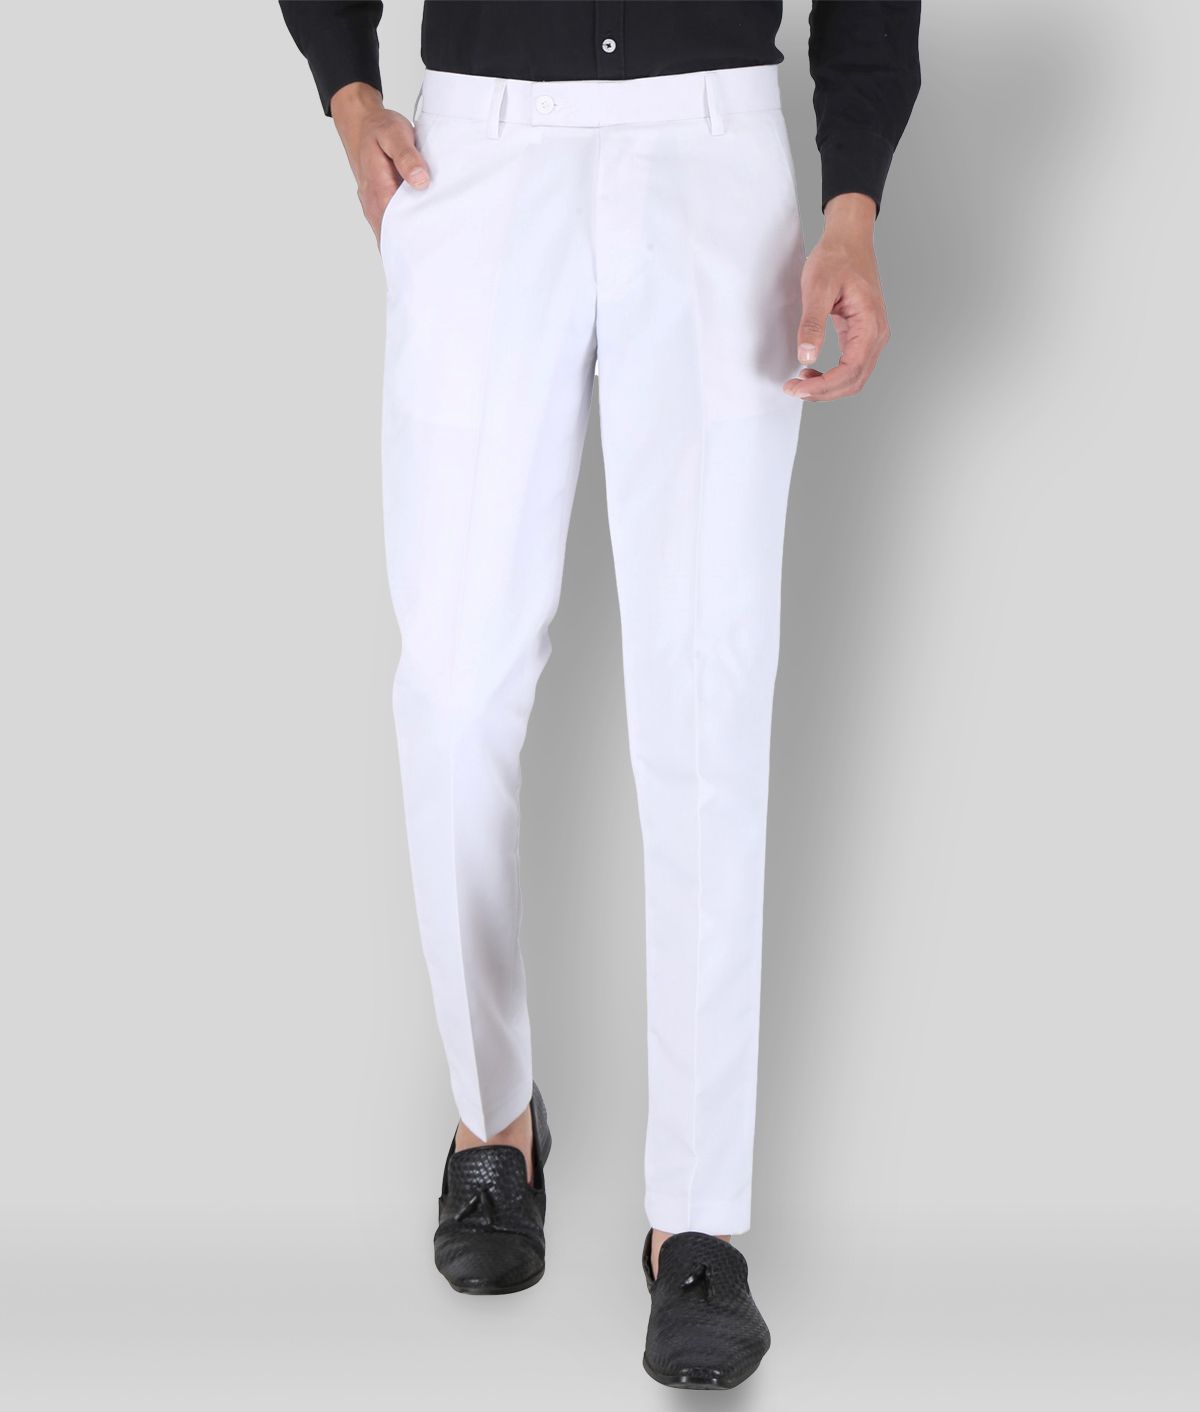     			Playerz - White Polycotton Slim - Fit Men's Trousers ( Pack of 1 )